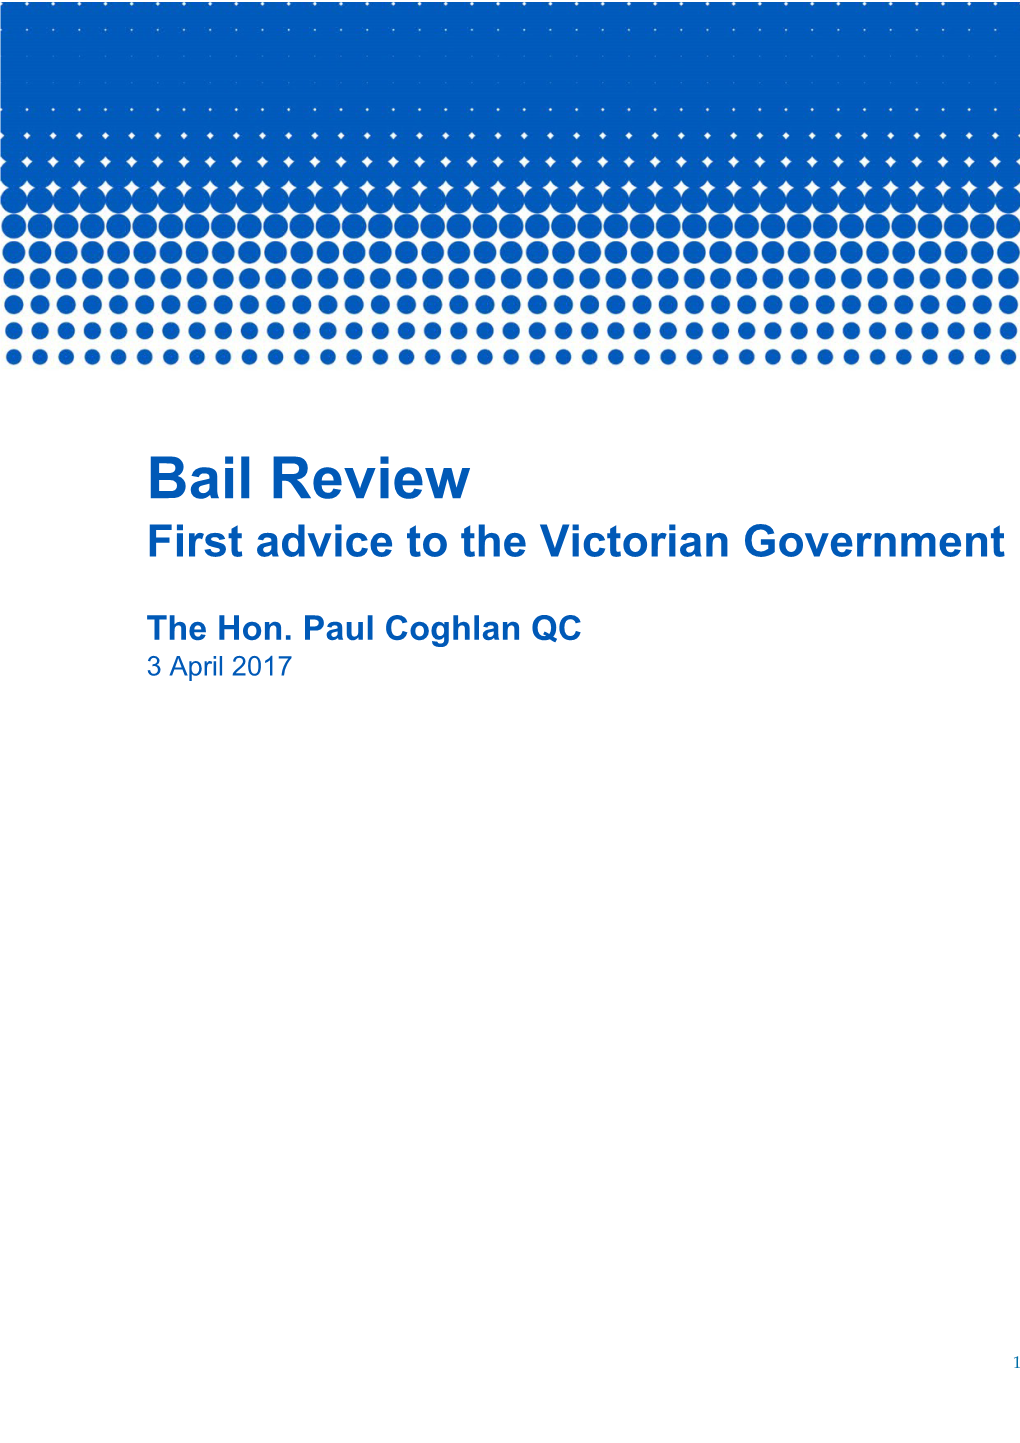 First Advice to the Victorian Government